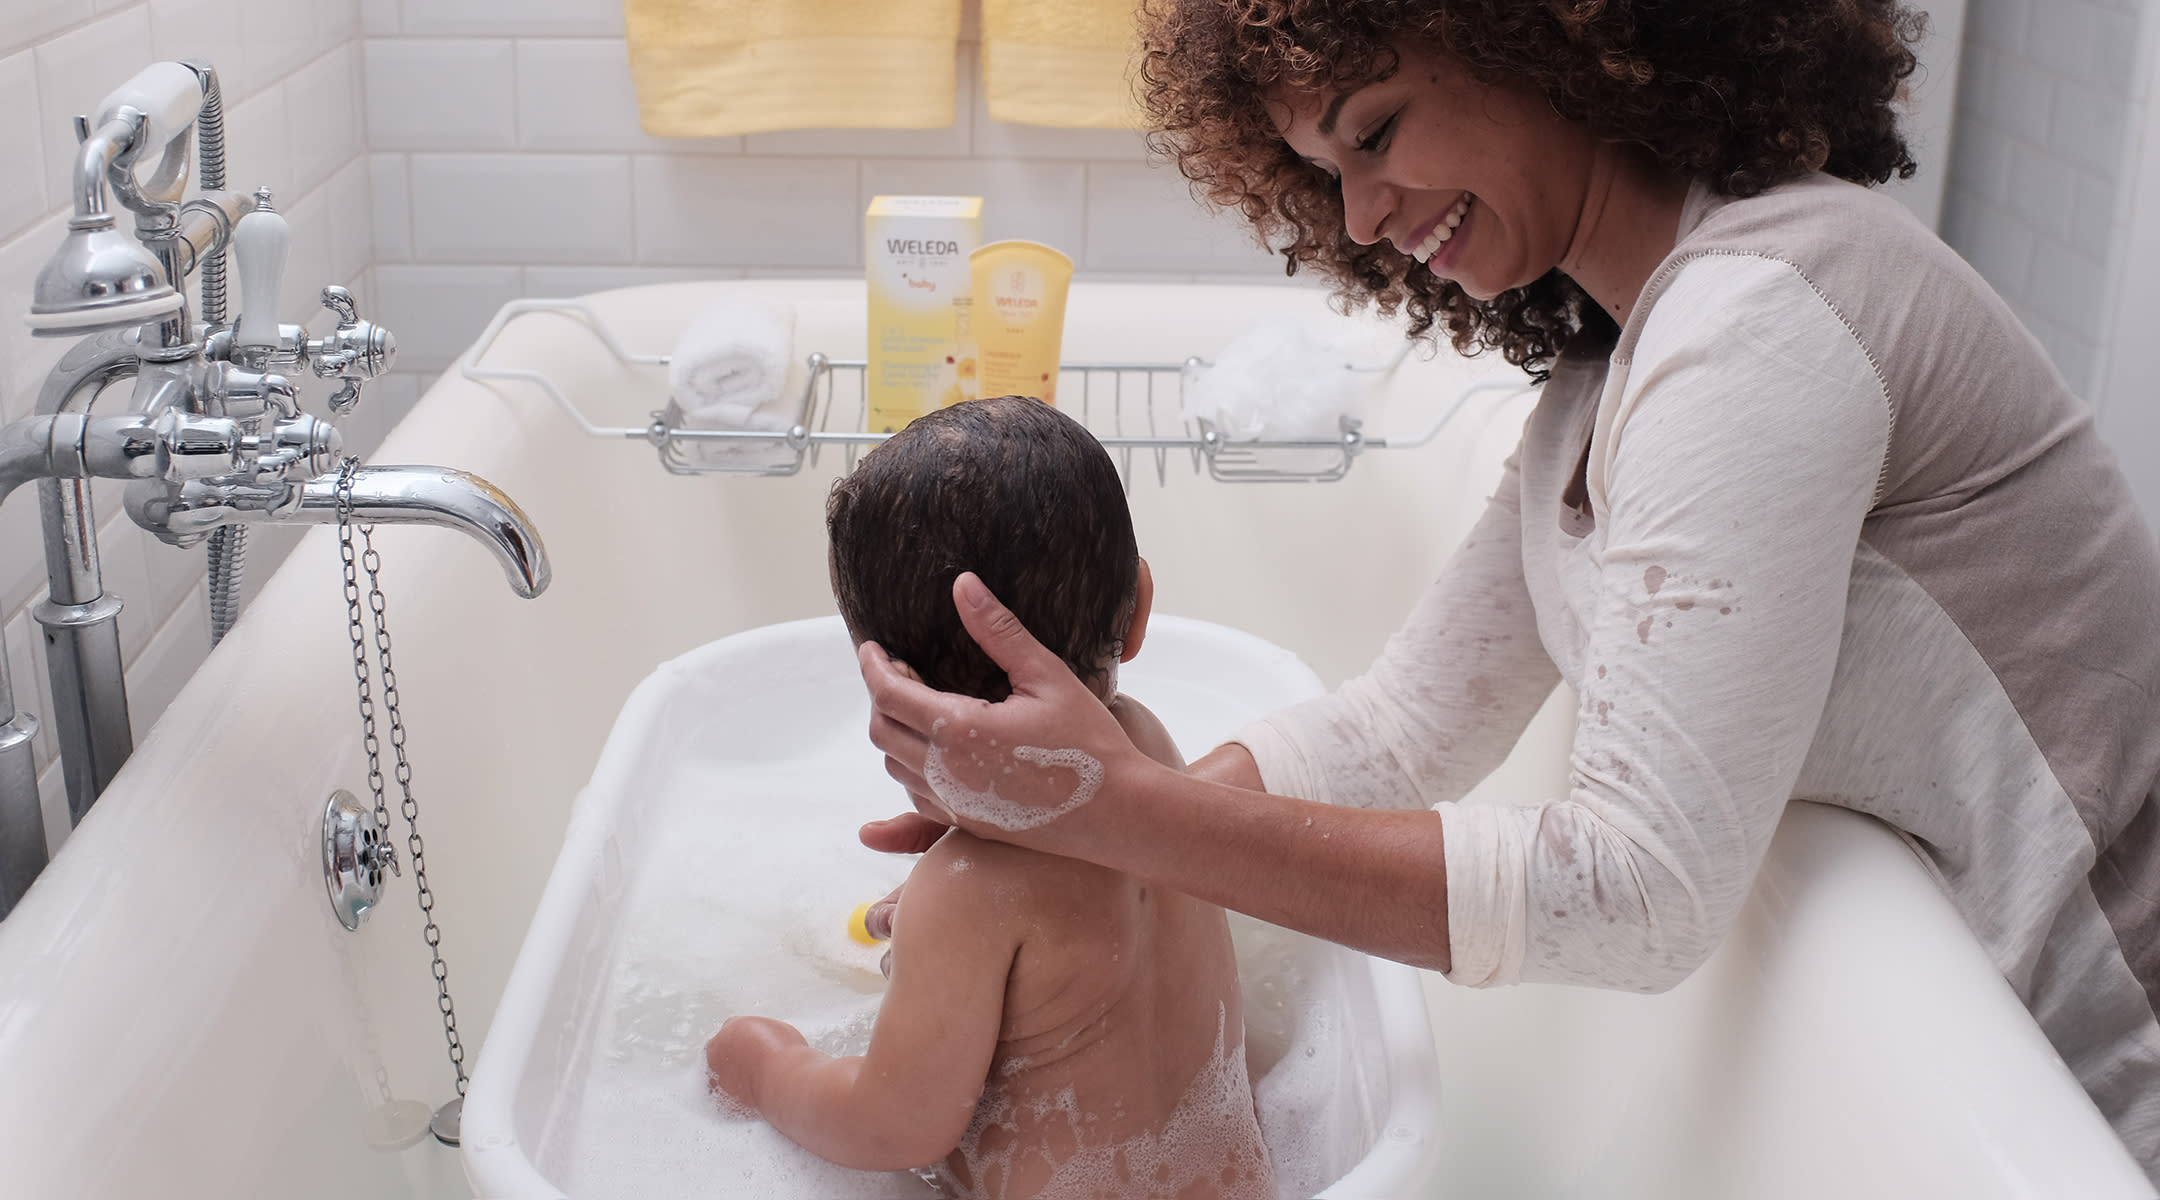 How To Bond With Baby During Bath Time